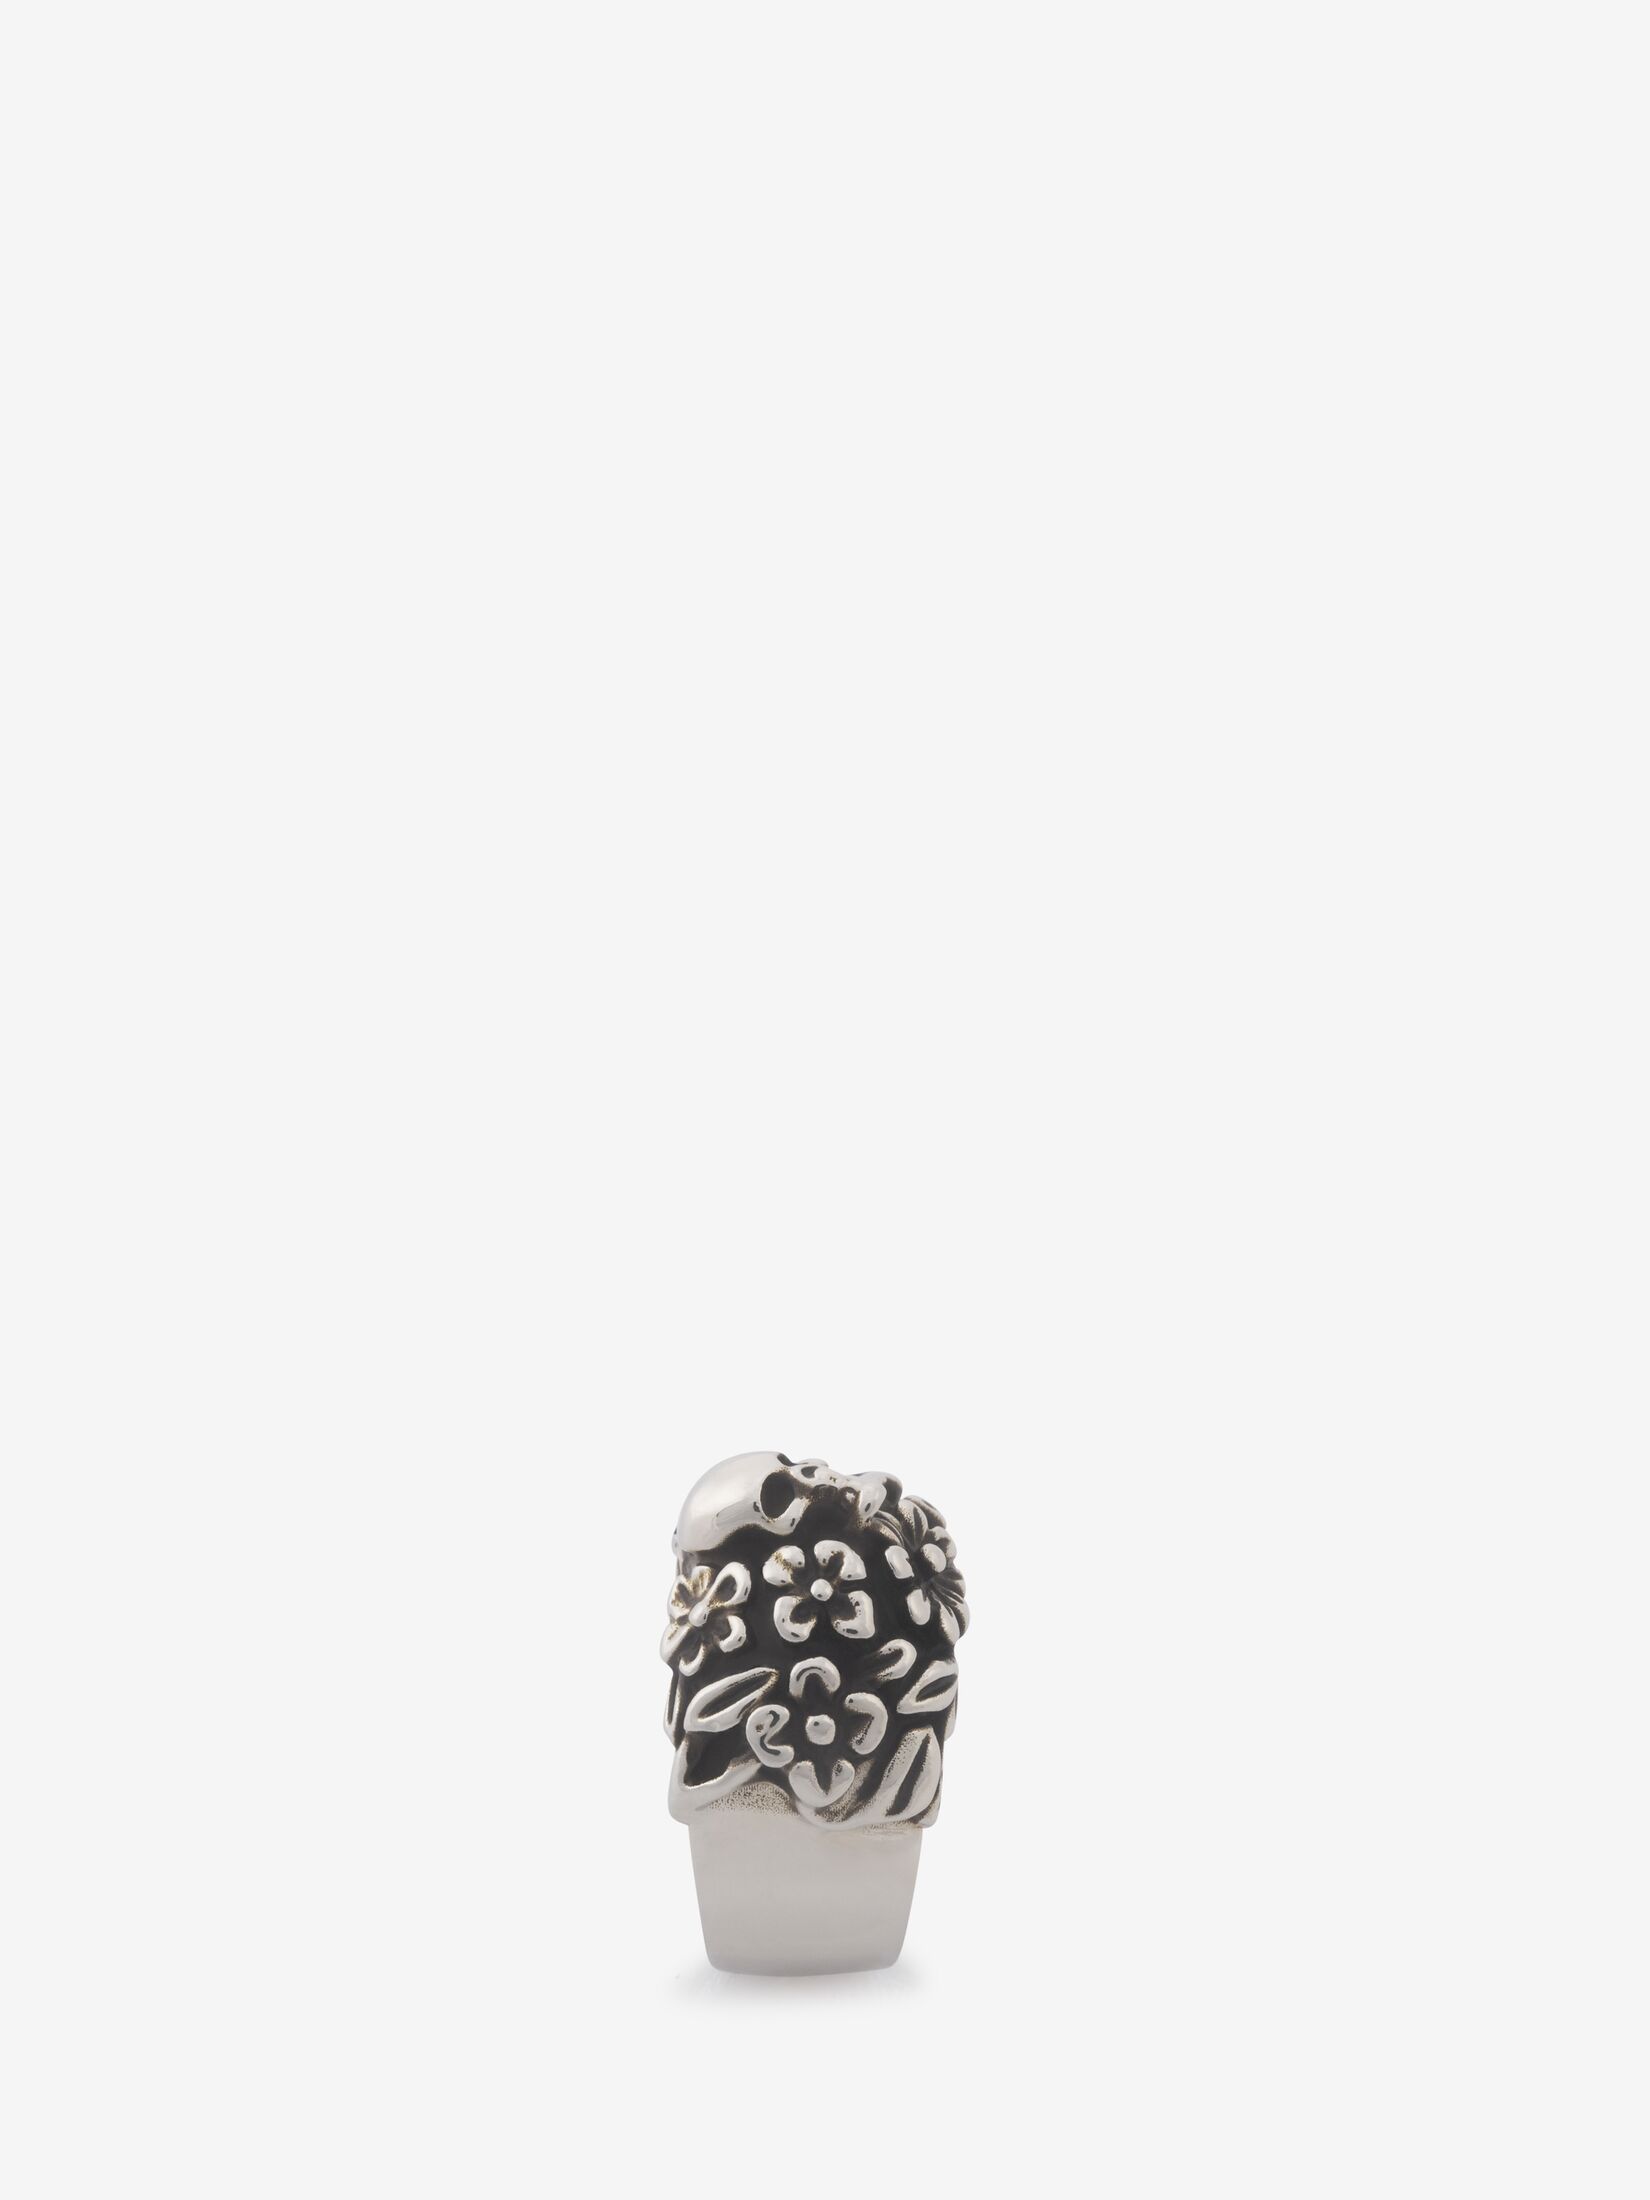 The Floral Skull Ring